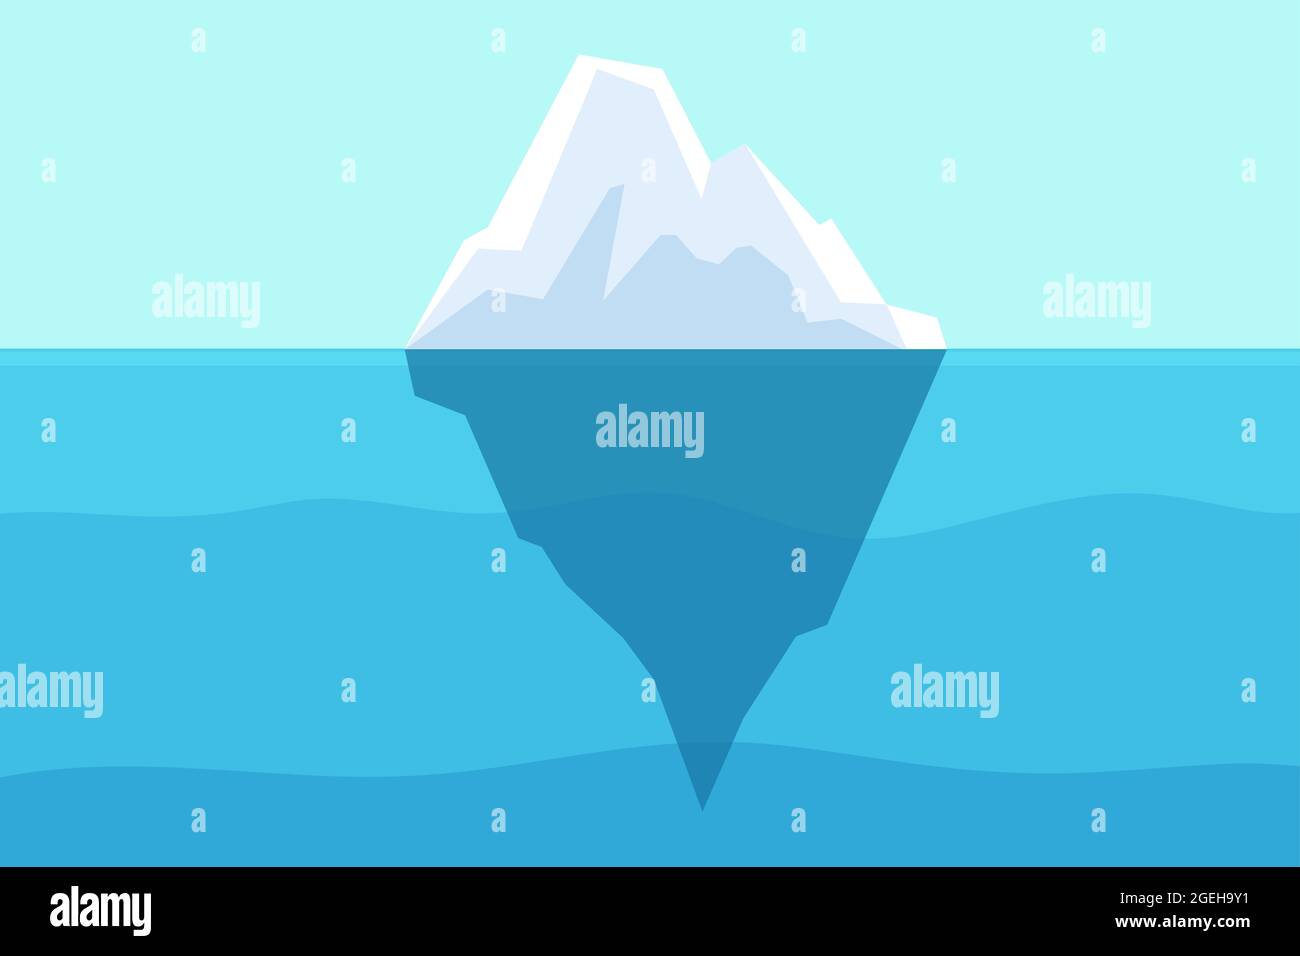 Iceberg floating in ocean. Arctic water, sea underwater with berg and freezing light. Polar or antarctica melting mountain vector landscape Stock Vector